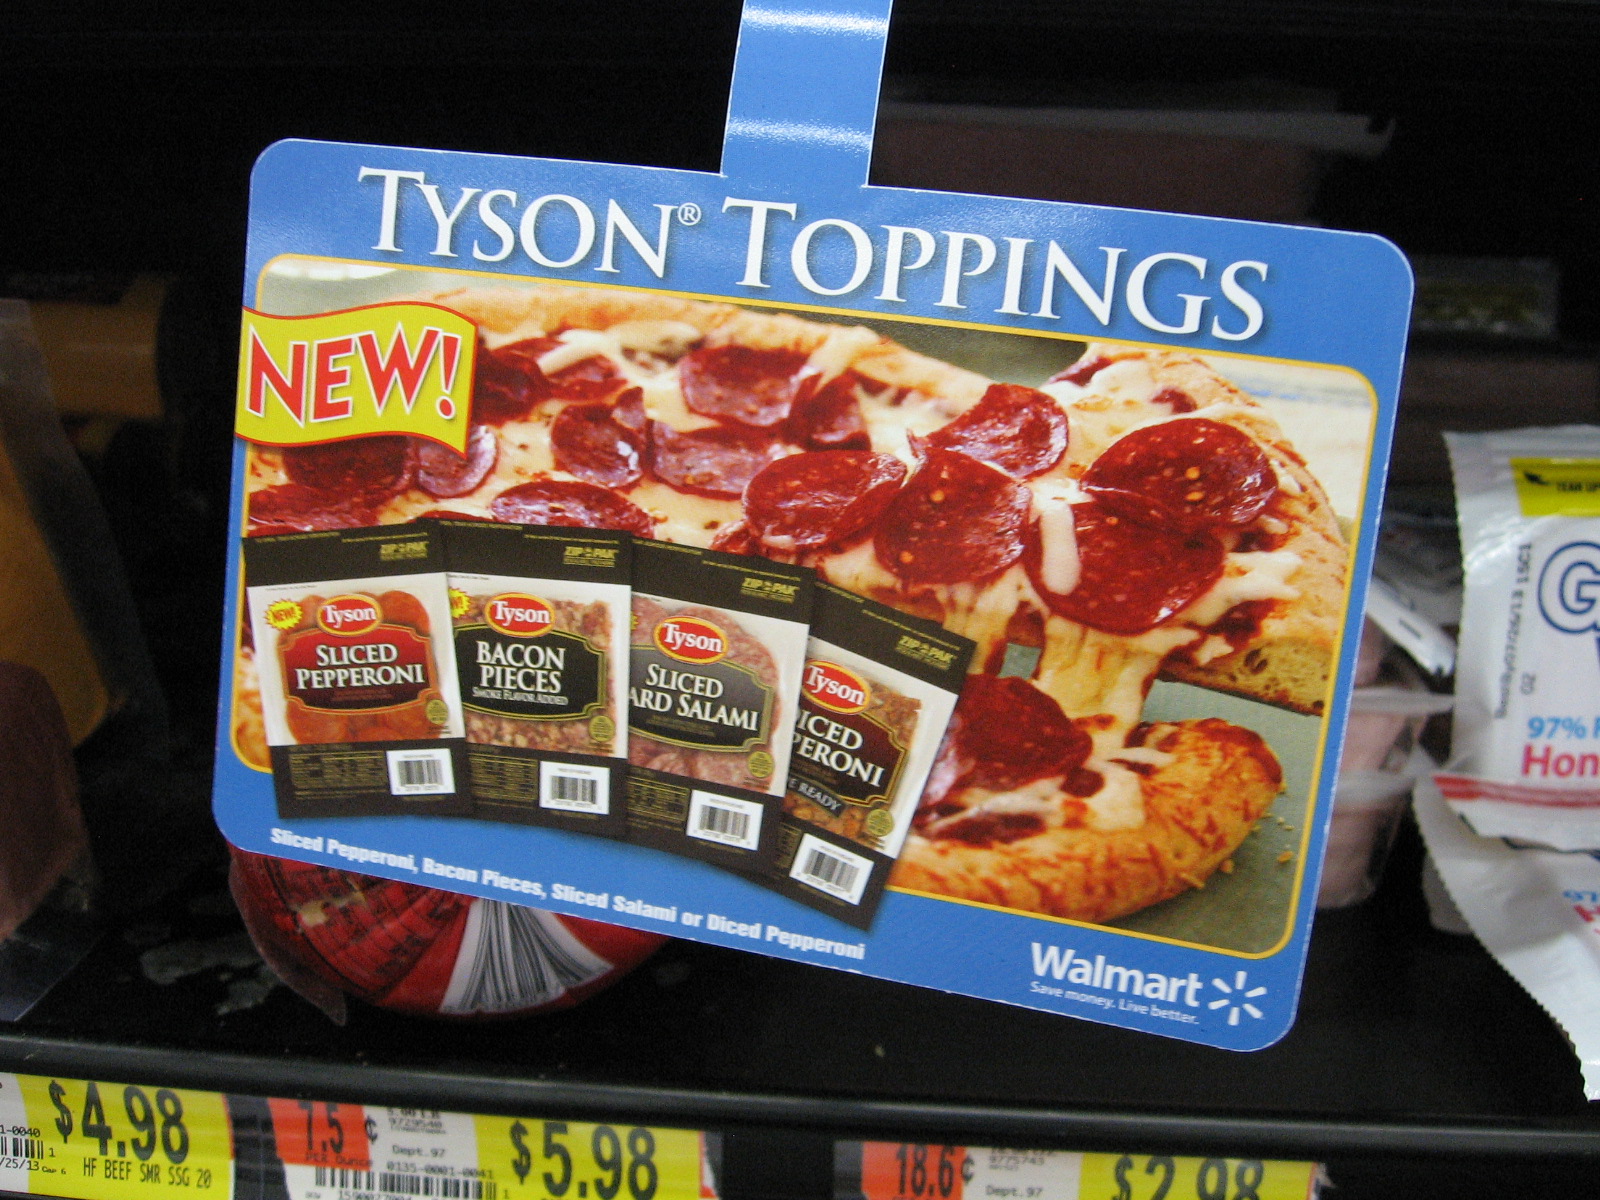 It always helps me to know what I'm looking for and what it looks like. These directional signs with all four varieties of Tyson Toppings made that easy at Walmart. 